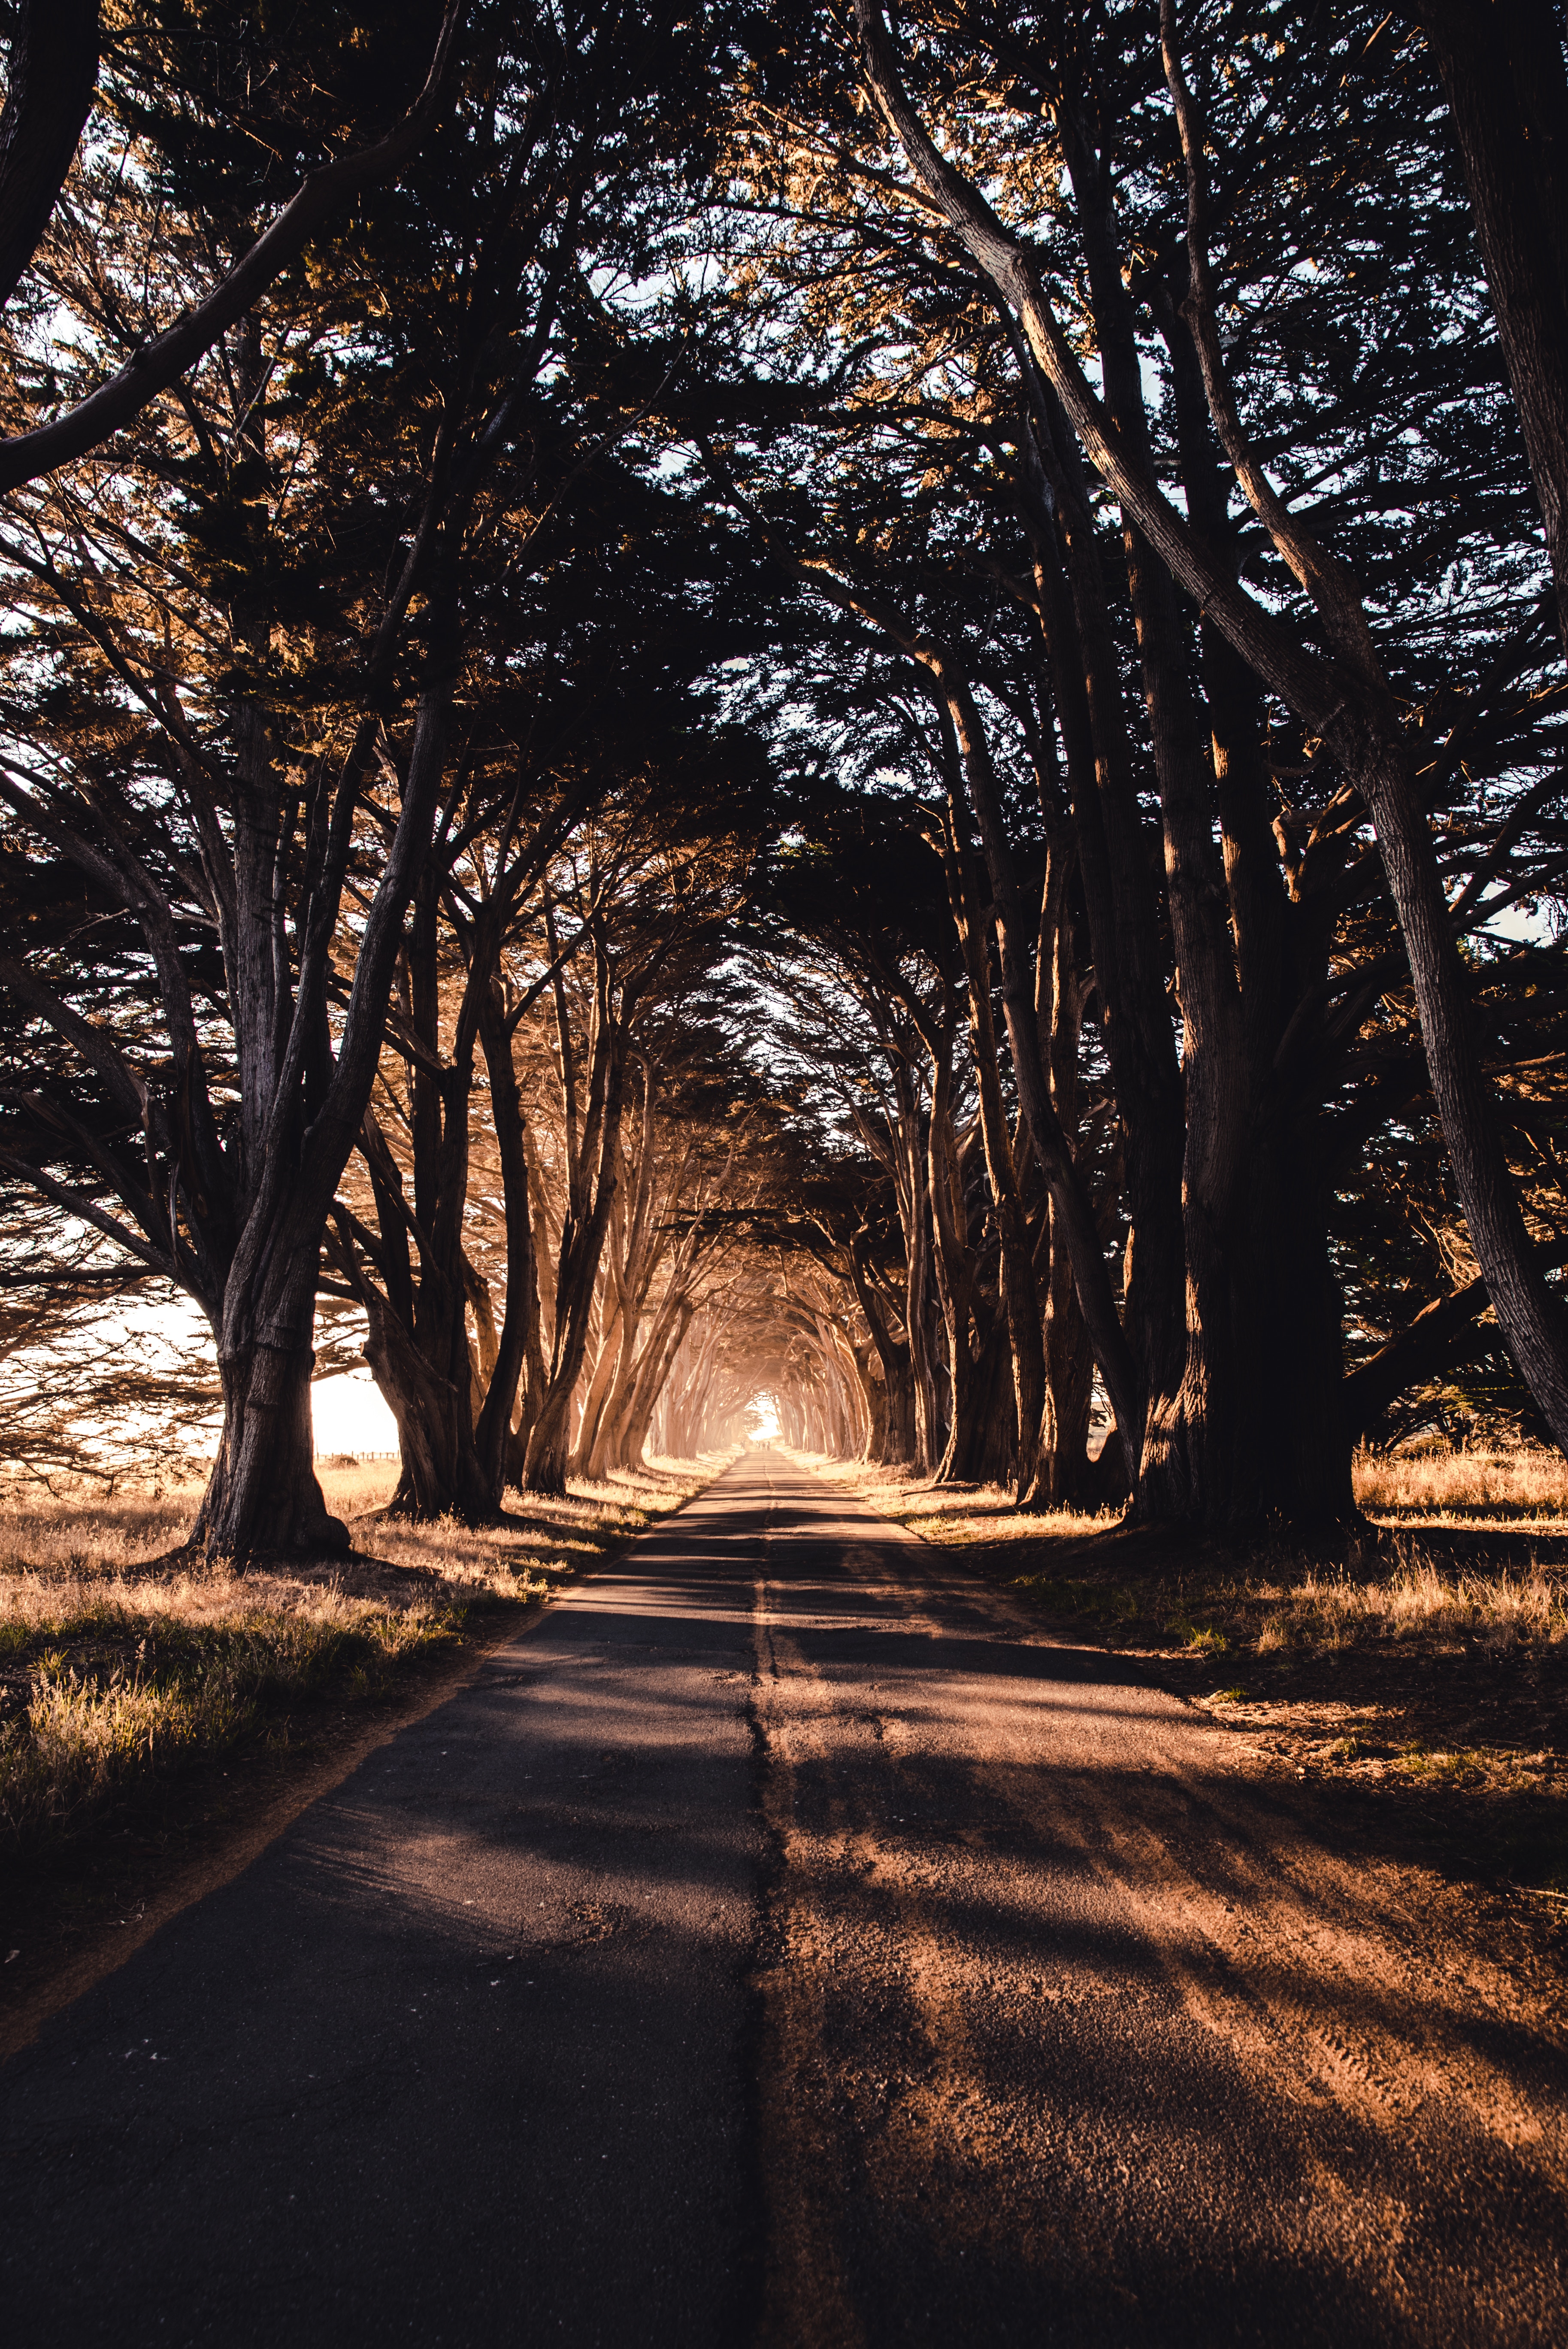 shadow, road, nature, trees lock screen backgrounds